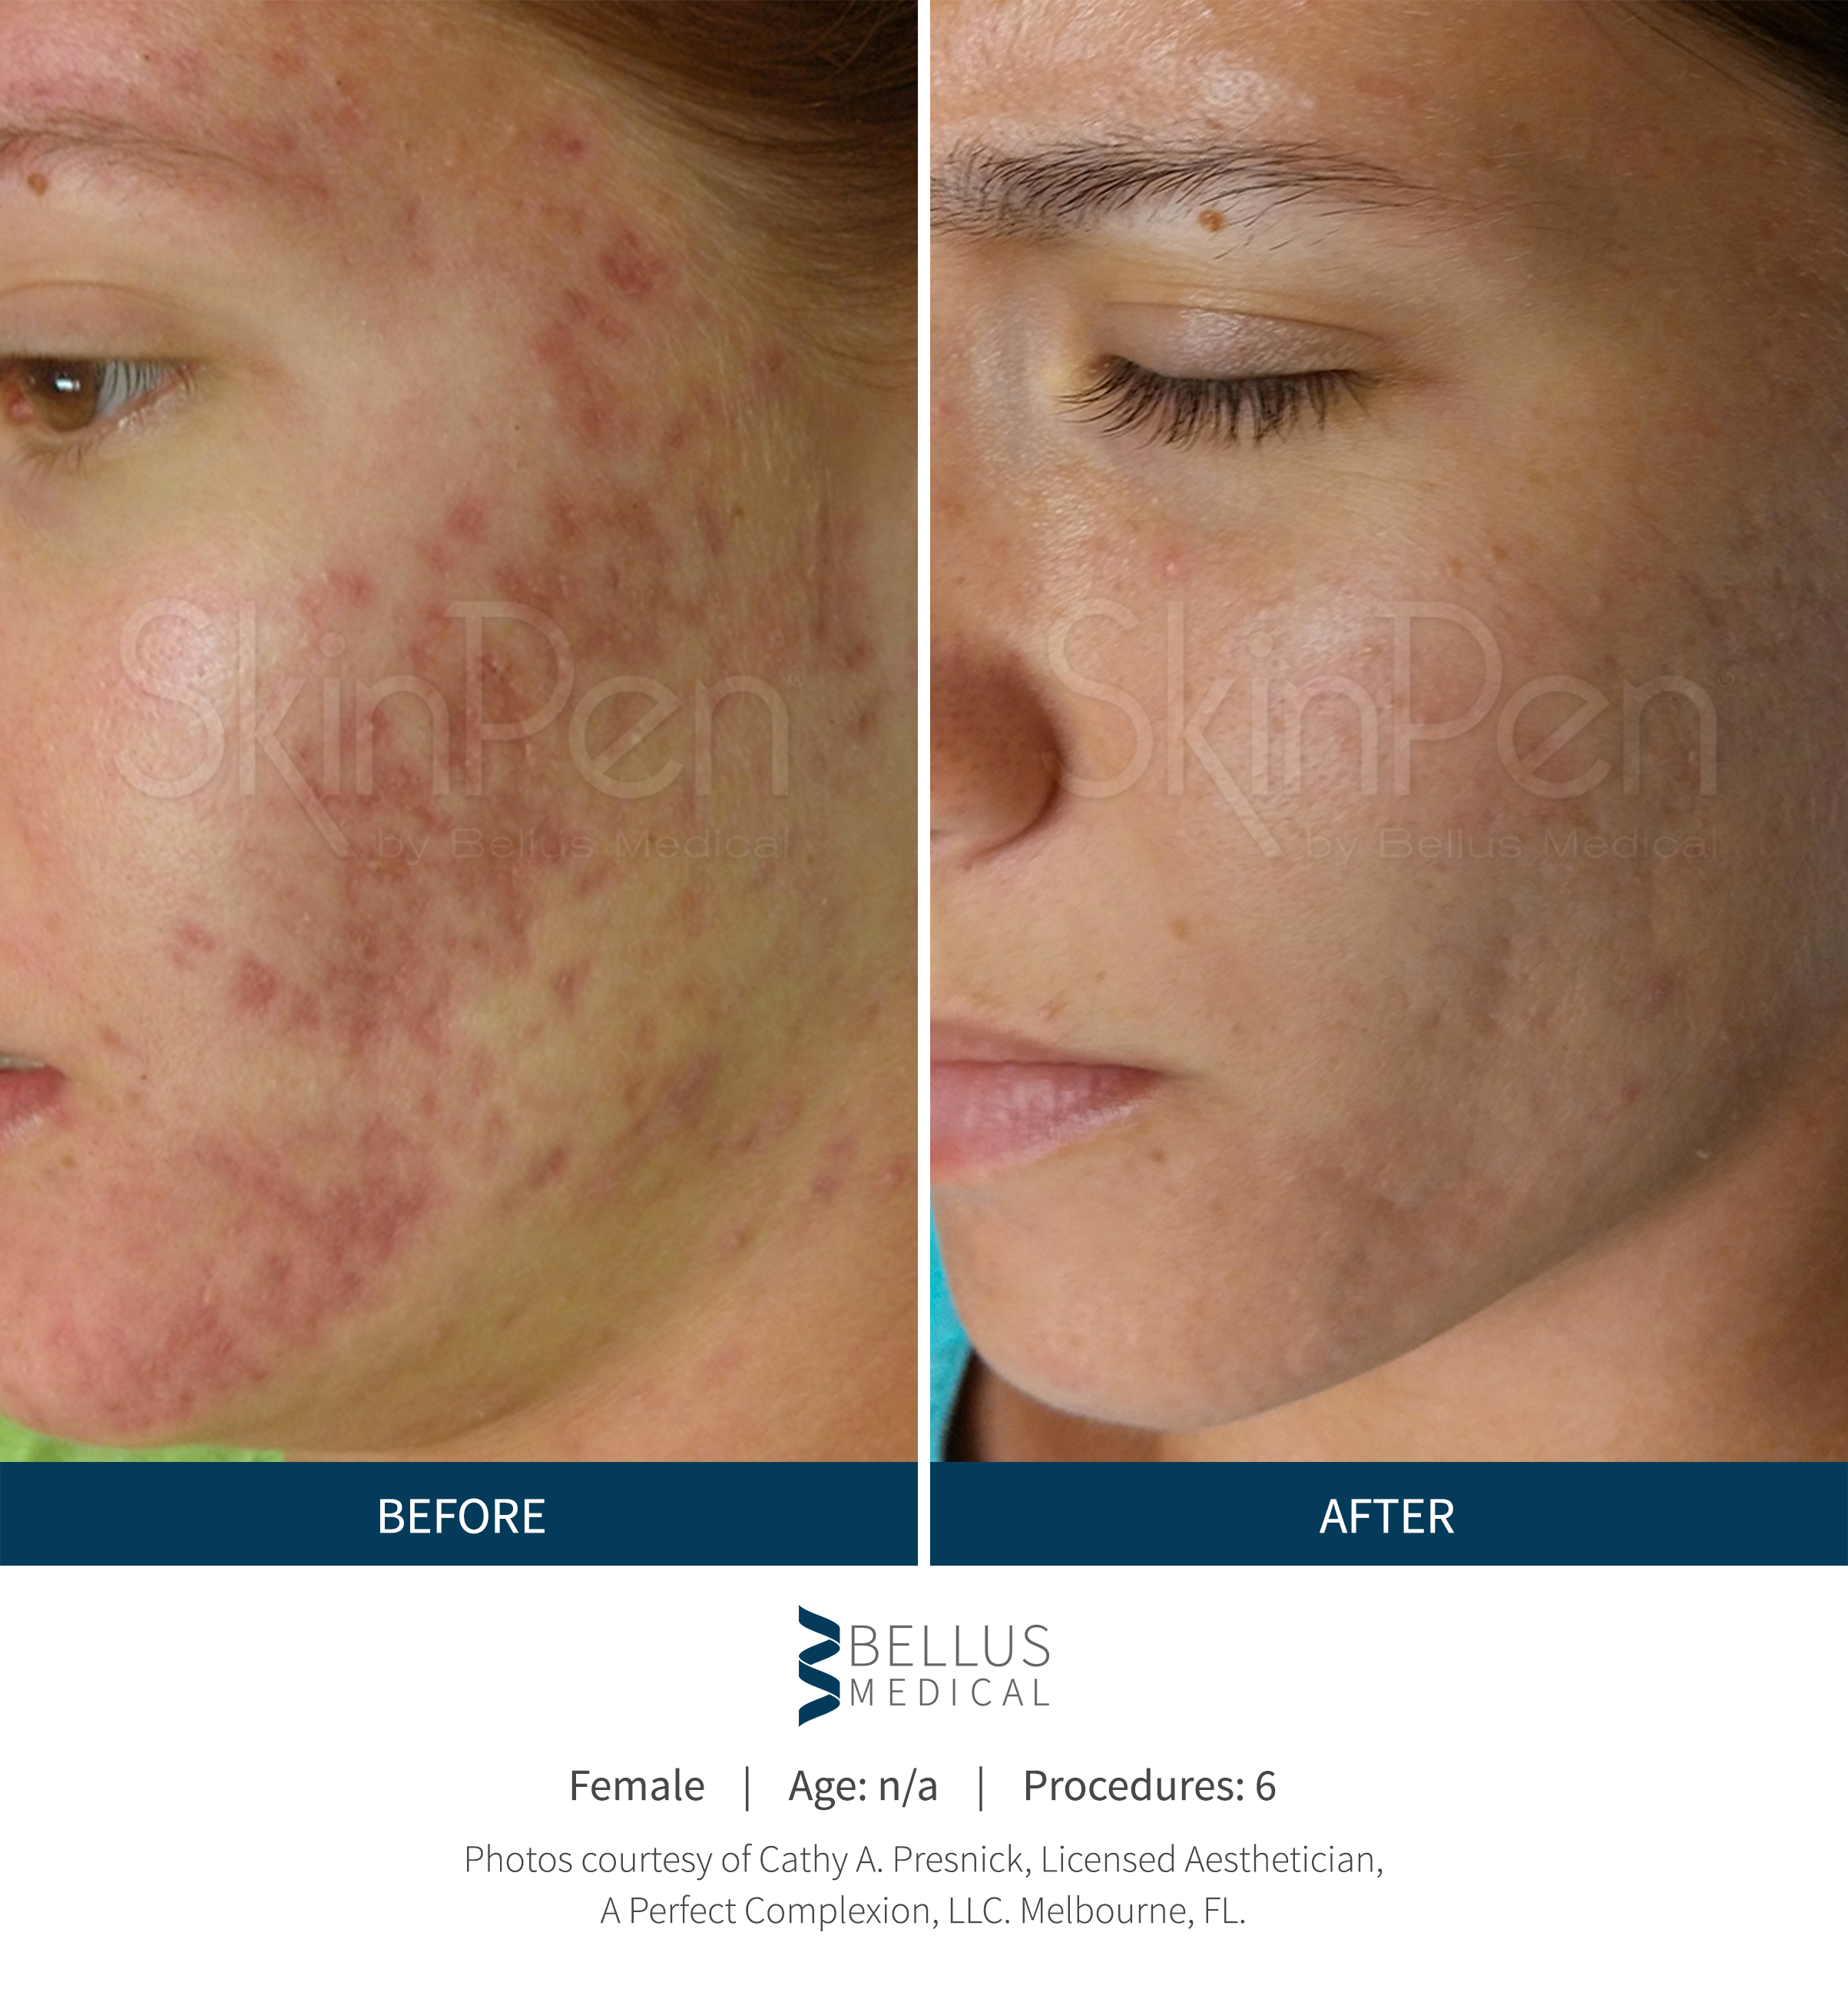 SkinPen Precision Microneedling Before and After